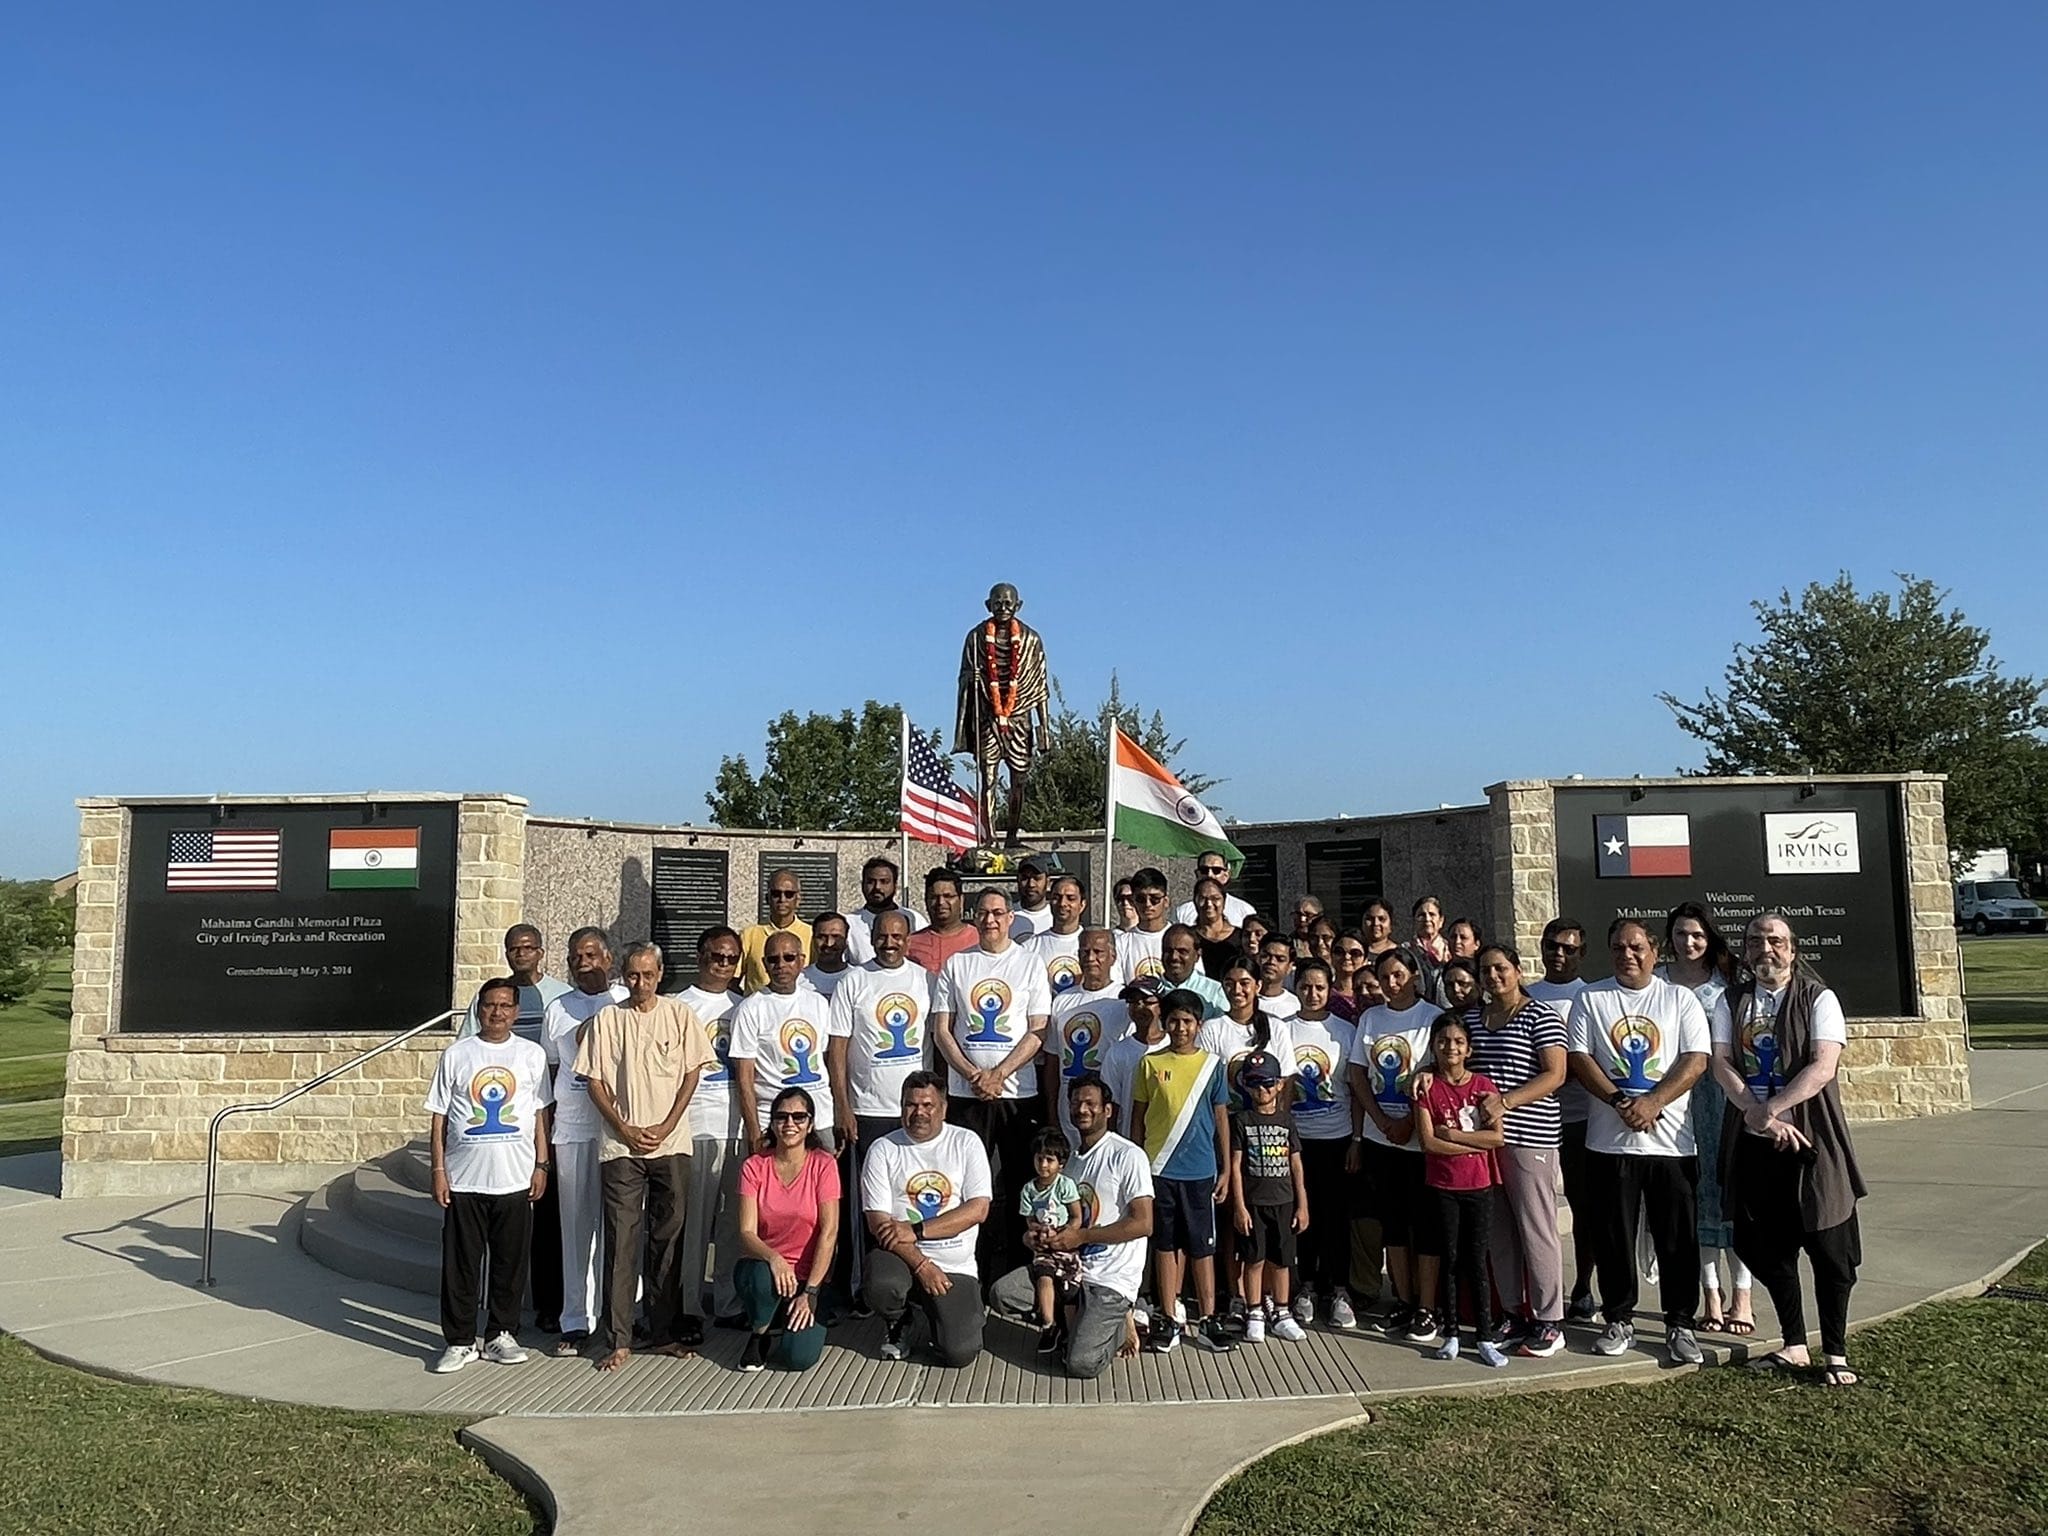 Glimpses of the International Day of yoga celebrations at the Mahatma Gandhi Memorial, Irving, Texas on June 18,2022